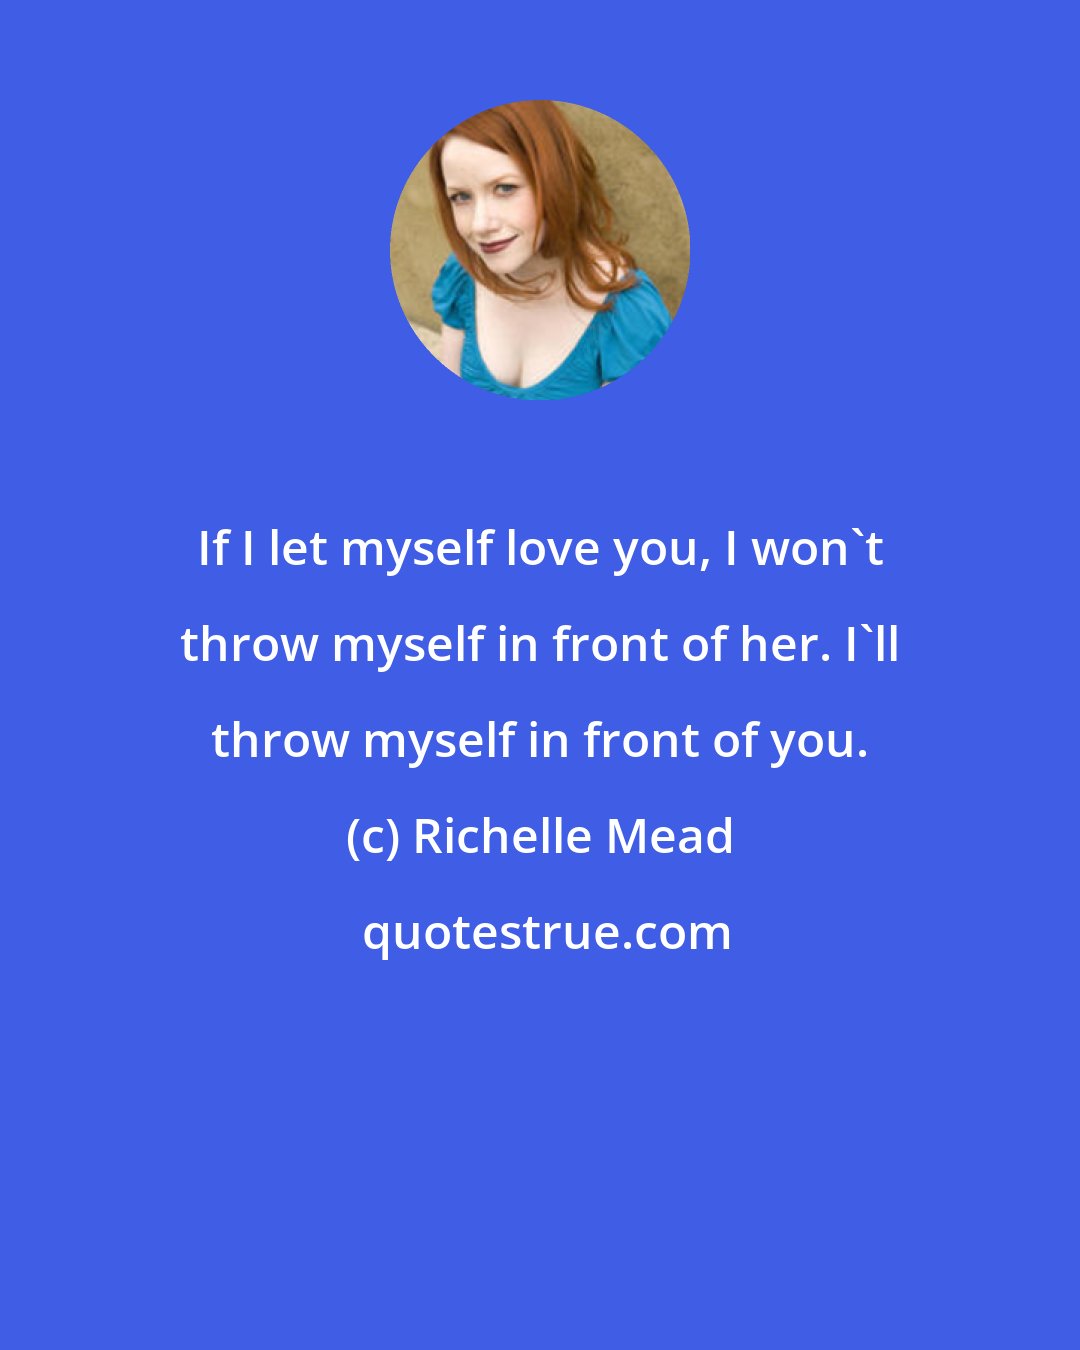 Richelle Mead: If I let myself love you, I won't throw myself in front of her. I'll throw myself in front of you.